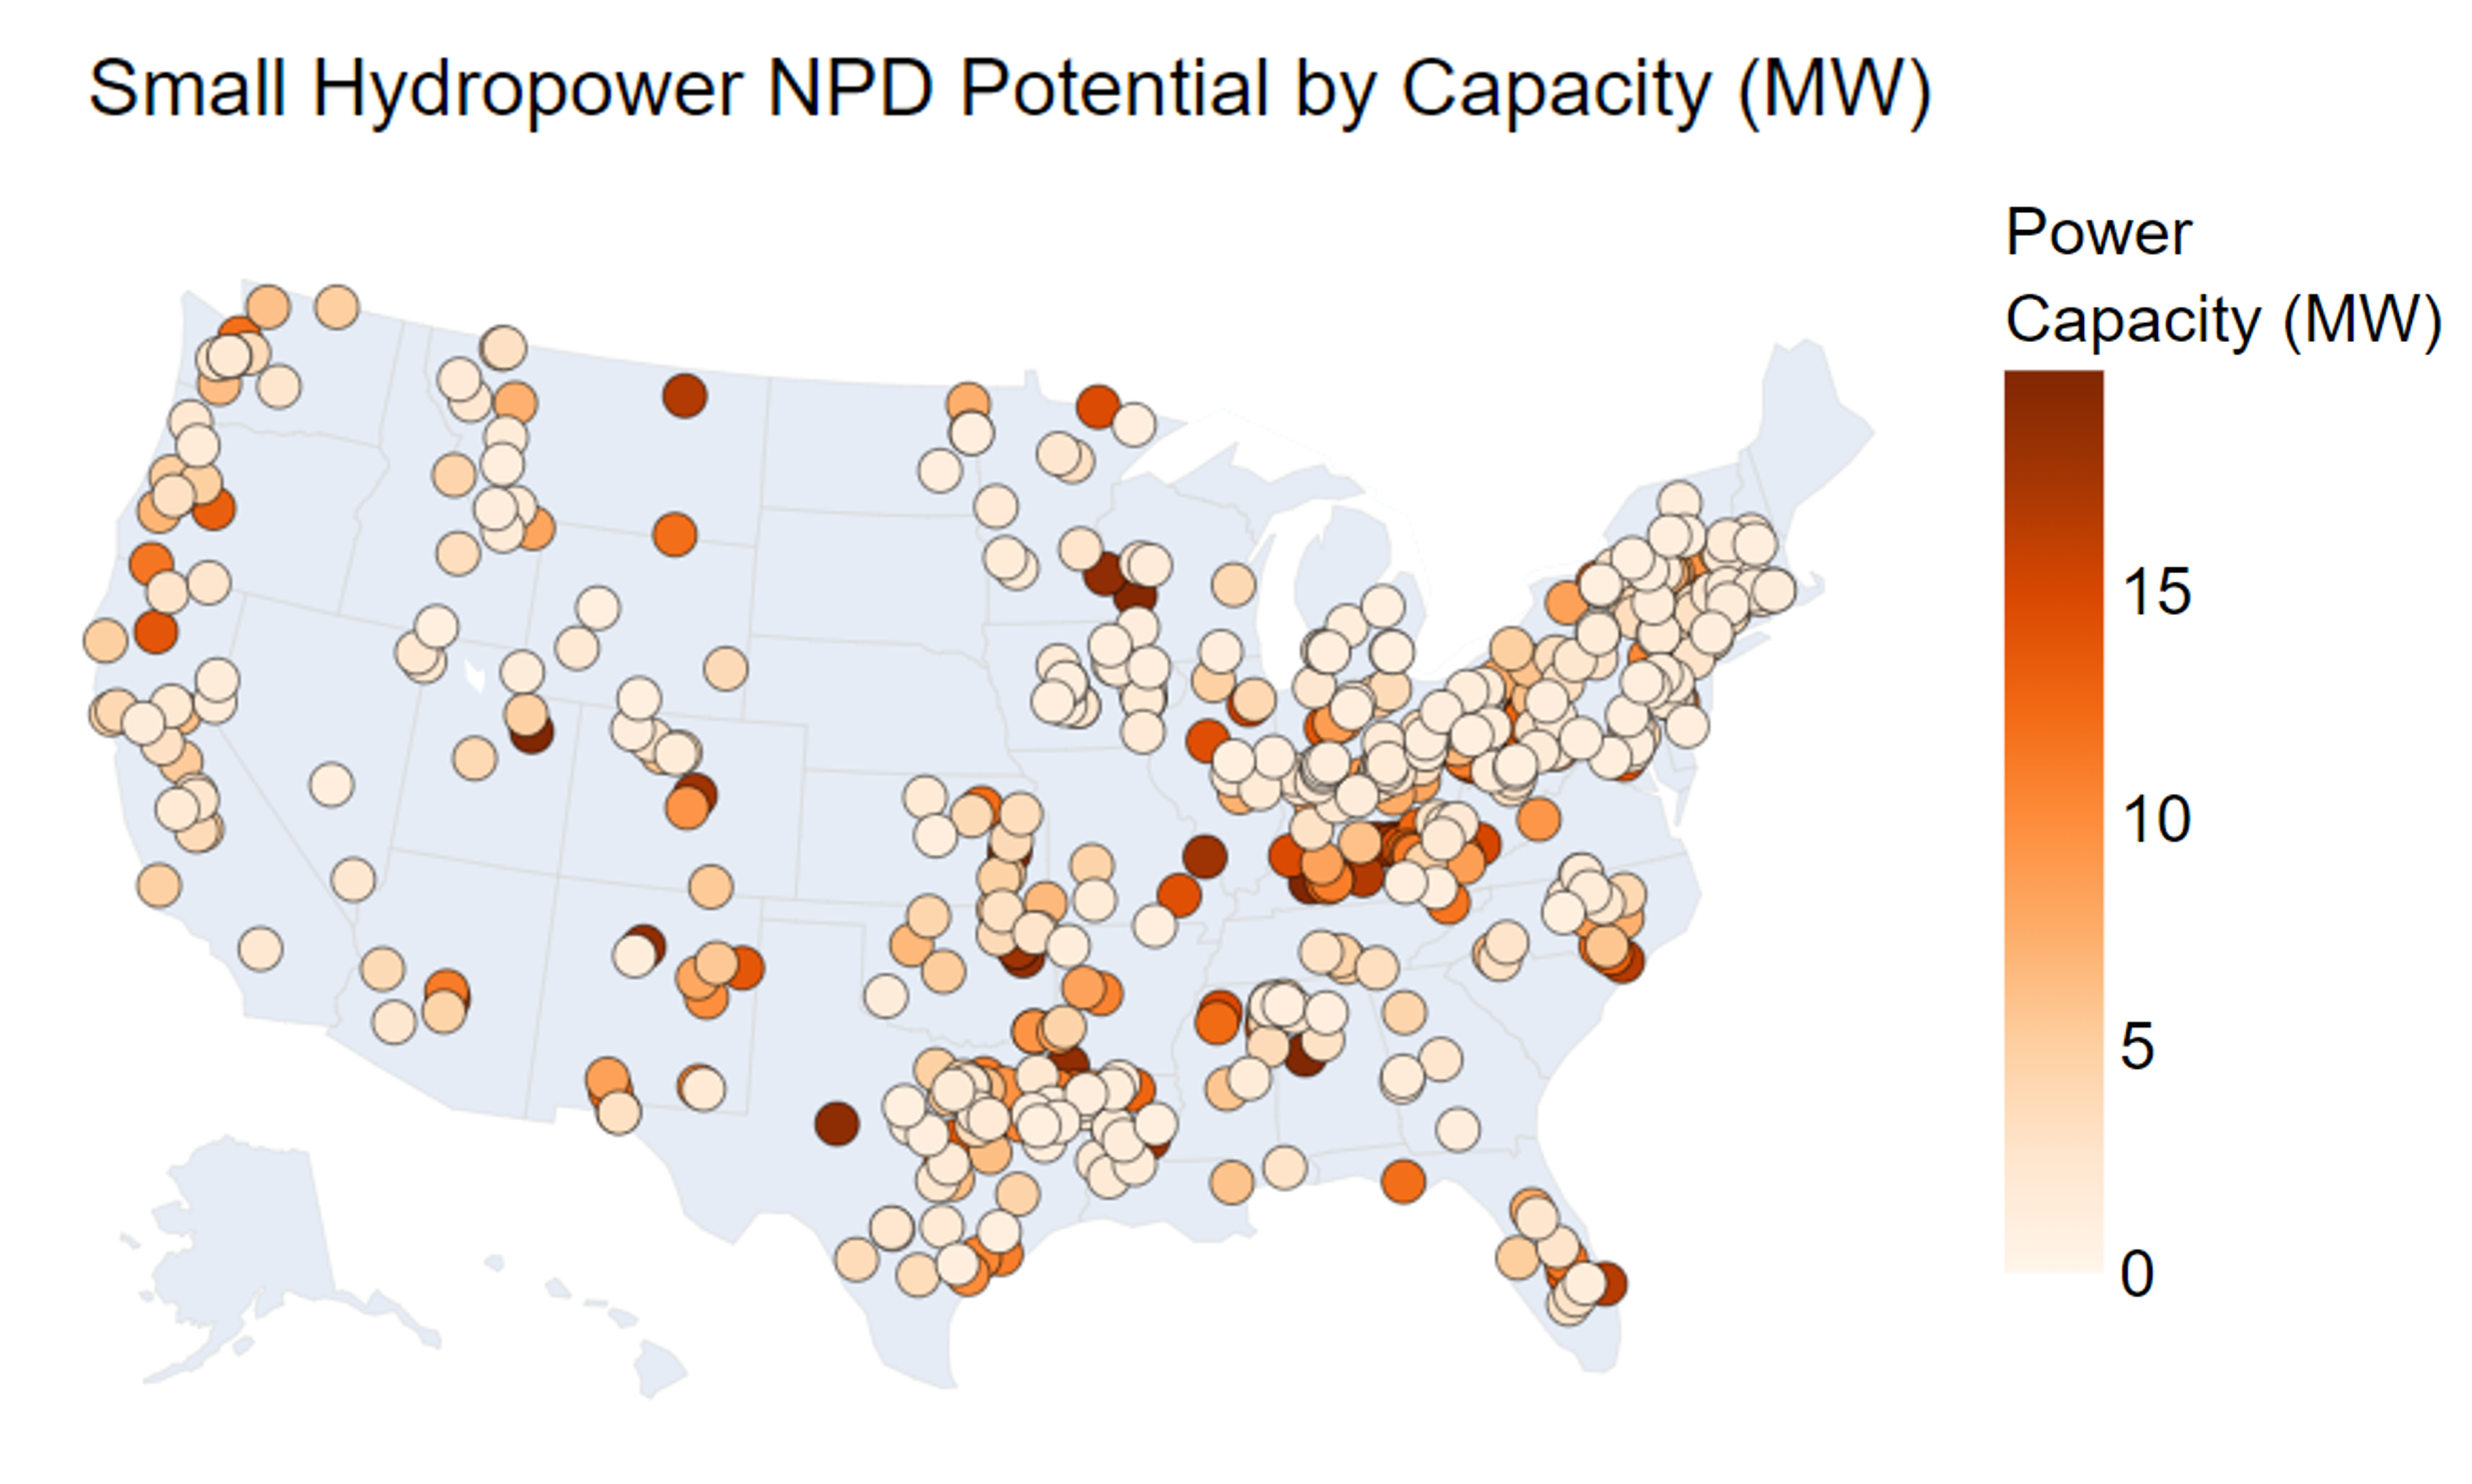 Most small hydropower projects under development in the United States between 2016 and 2018 were anticipated to generate 5 MW or less. (Figure by Travis Douville | Pacific Northwest National Laboratory)